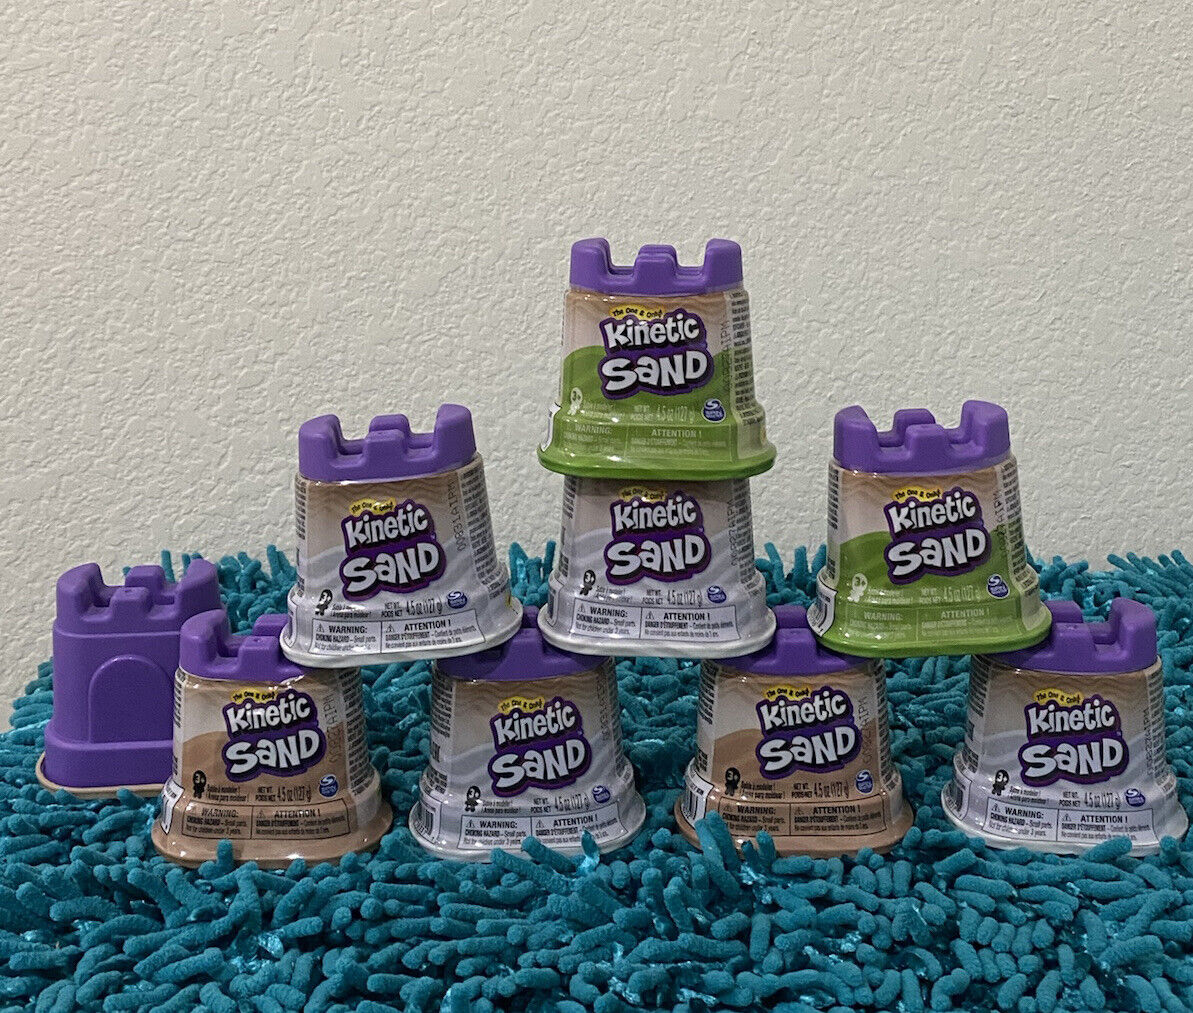 Kinetic Sand In a popularity Spin Ranking integrated 1st place Master Bulk 4.5oz Single Containers Lot